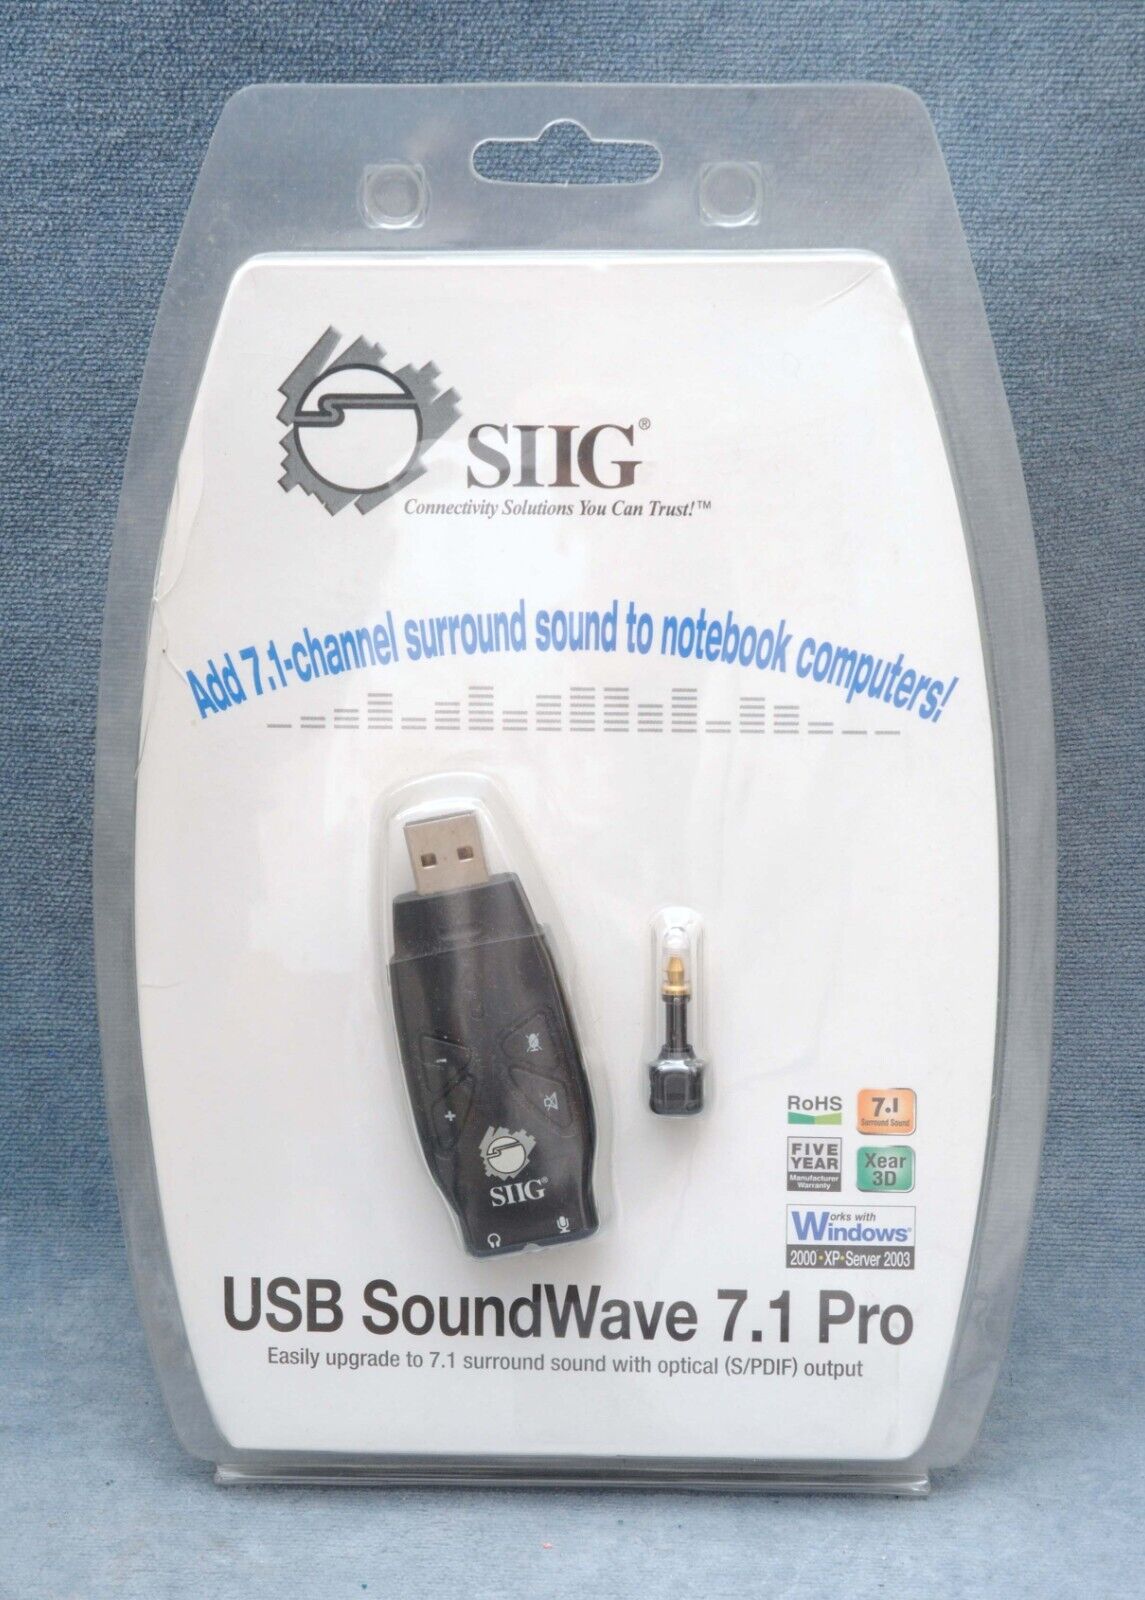 SIIG USB SOUNDWAVE 7.1 PRO - NEW IN UNOPENED PACKAGING